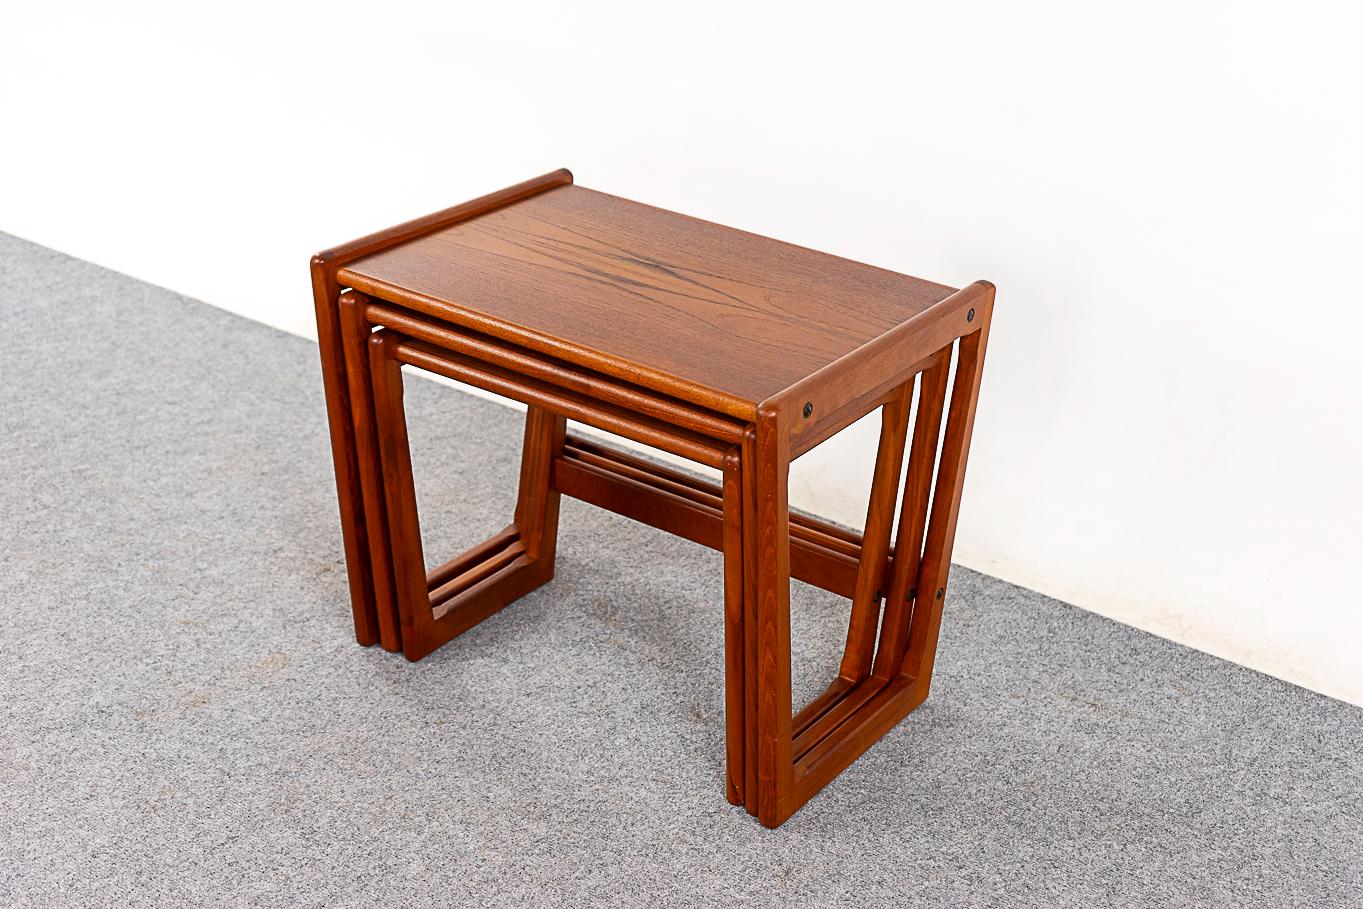 Teak mid-century nesting tables, circa 1970's. Striking solid teak trapezoidal legs and bookmatched veneer tops.The footprint of 1 table with the functionality of 3!  Top of the middle table has minor sun fade.